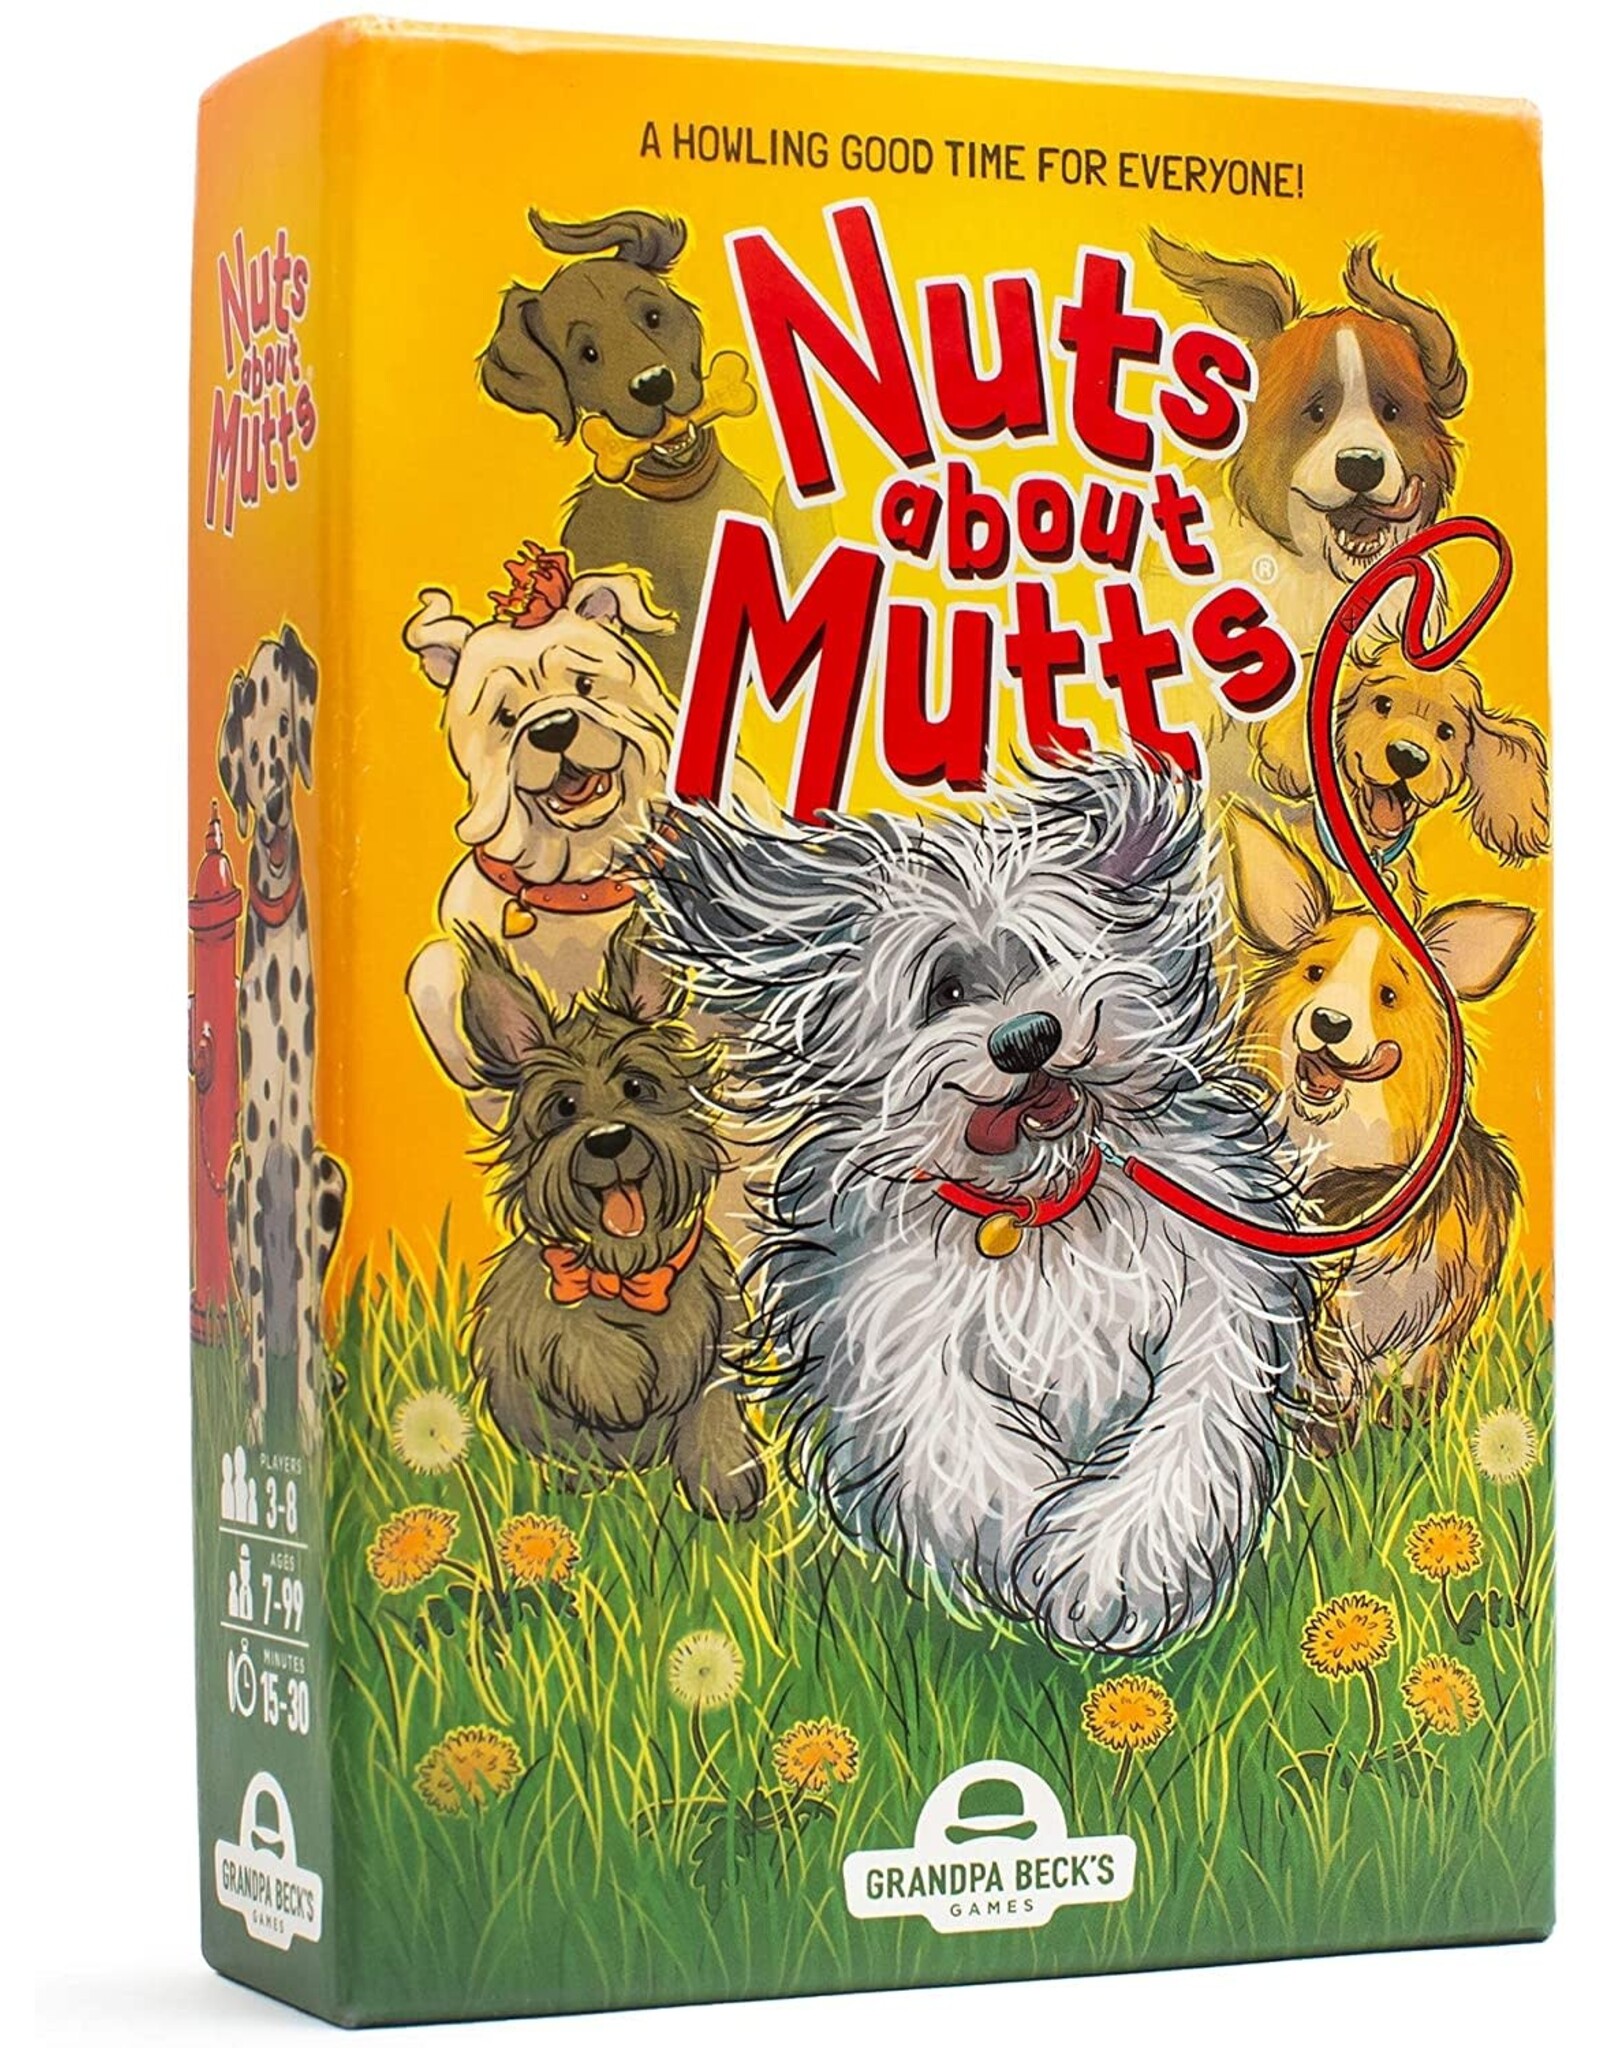 Grandpa Beck's Nuts About Mutts